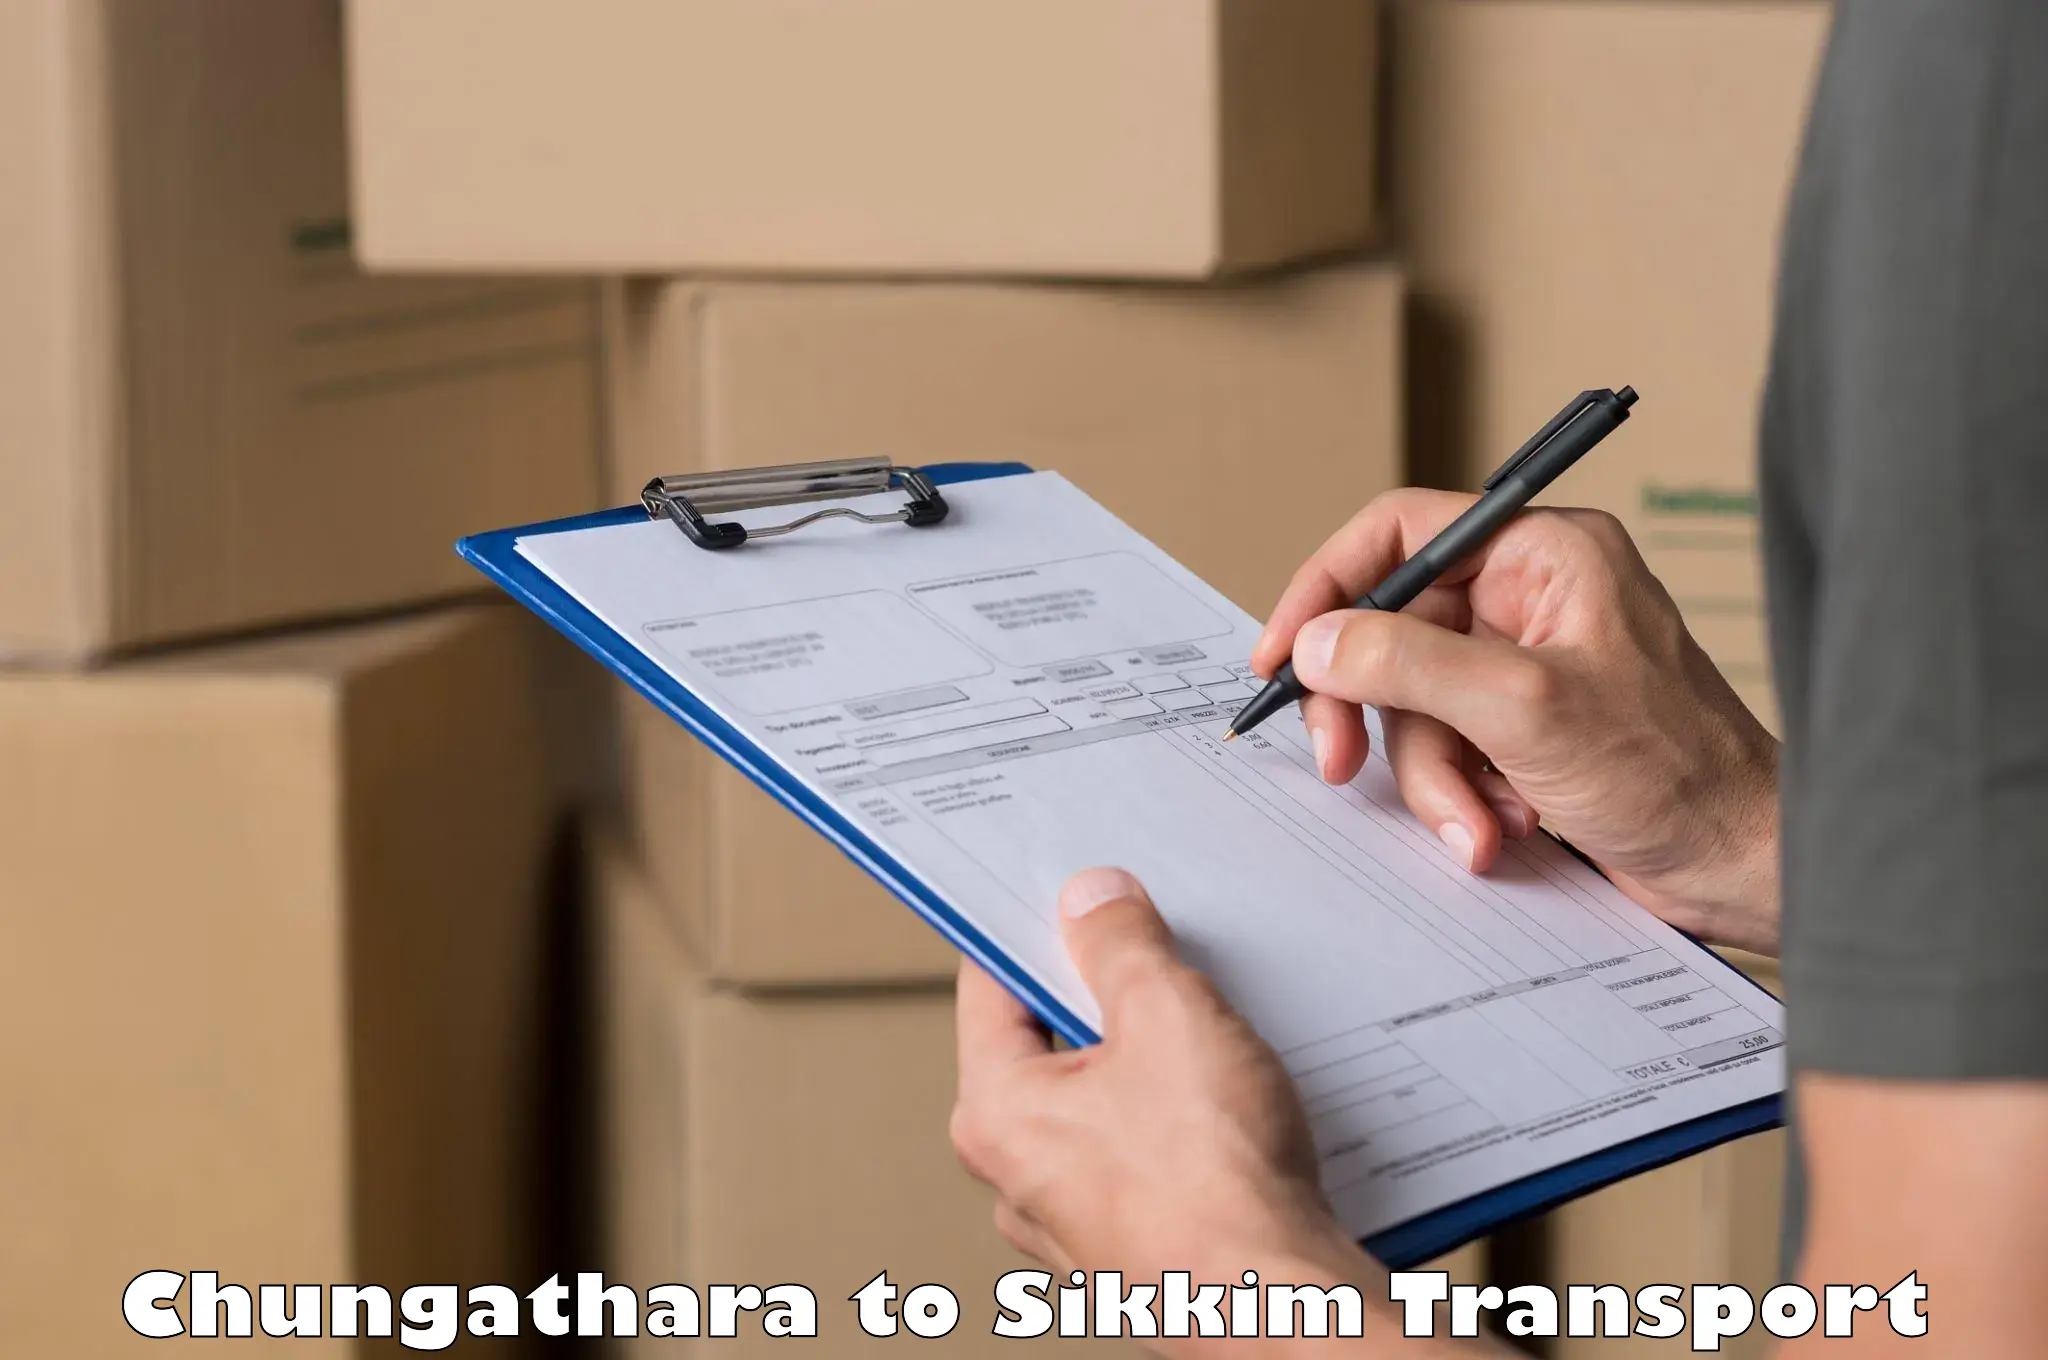 Part load transport service in India Chungathara to East Sikkim